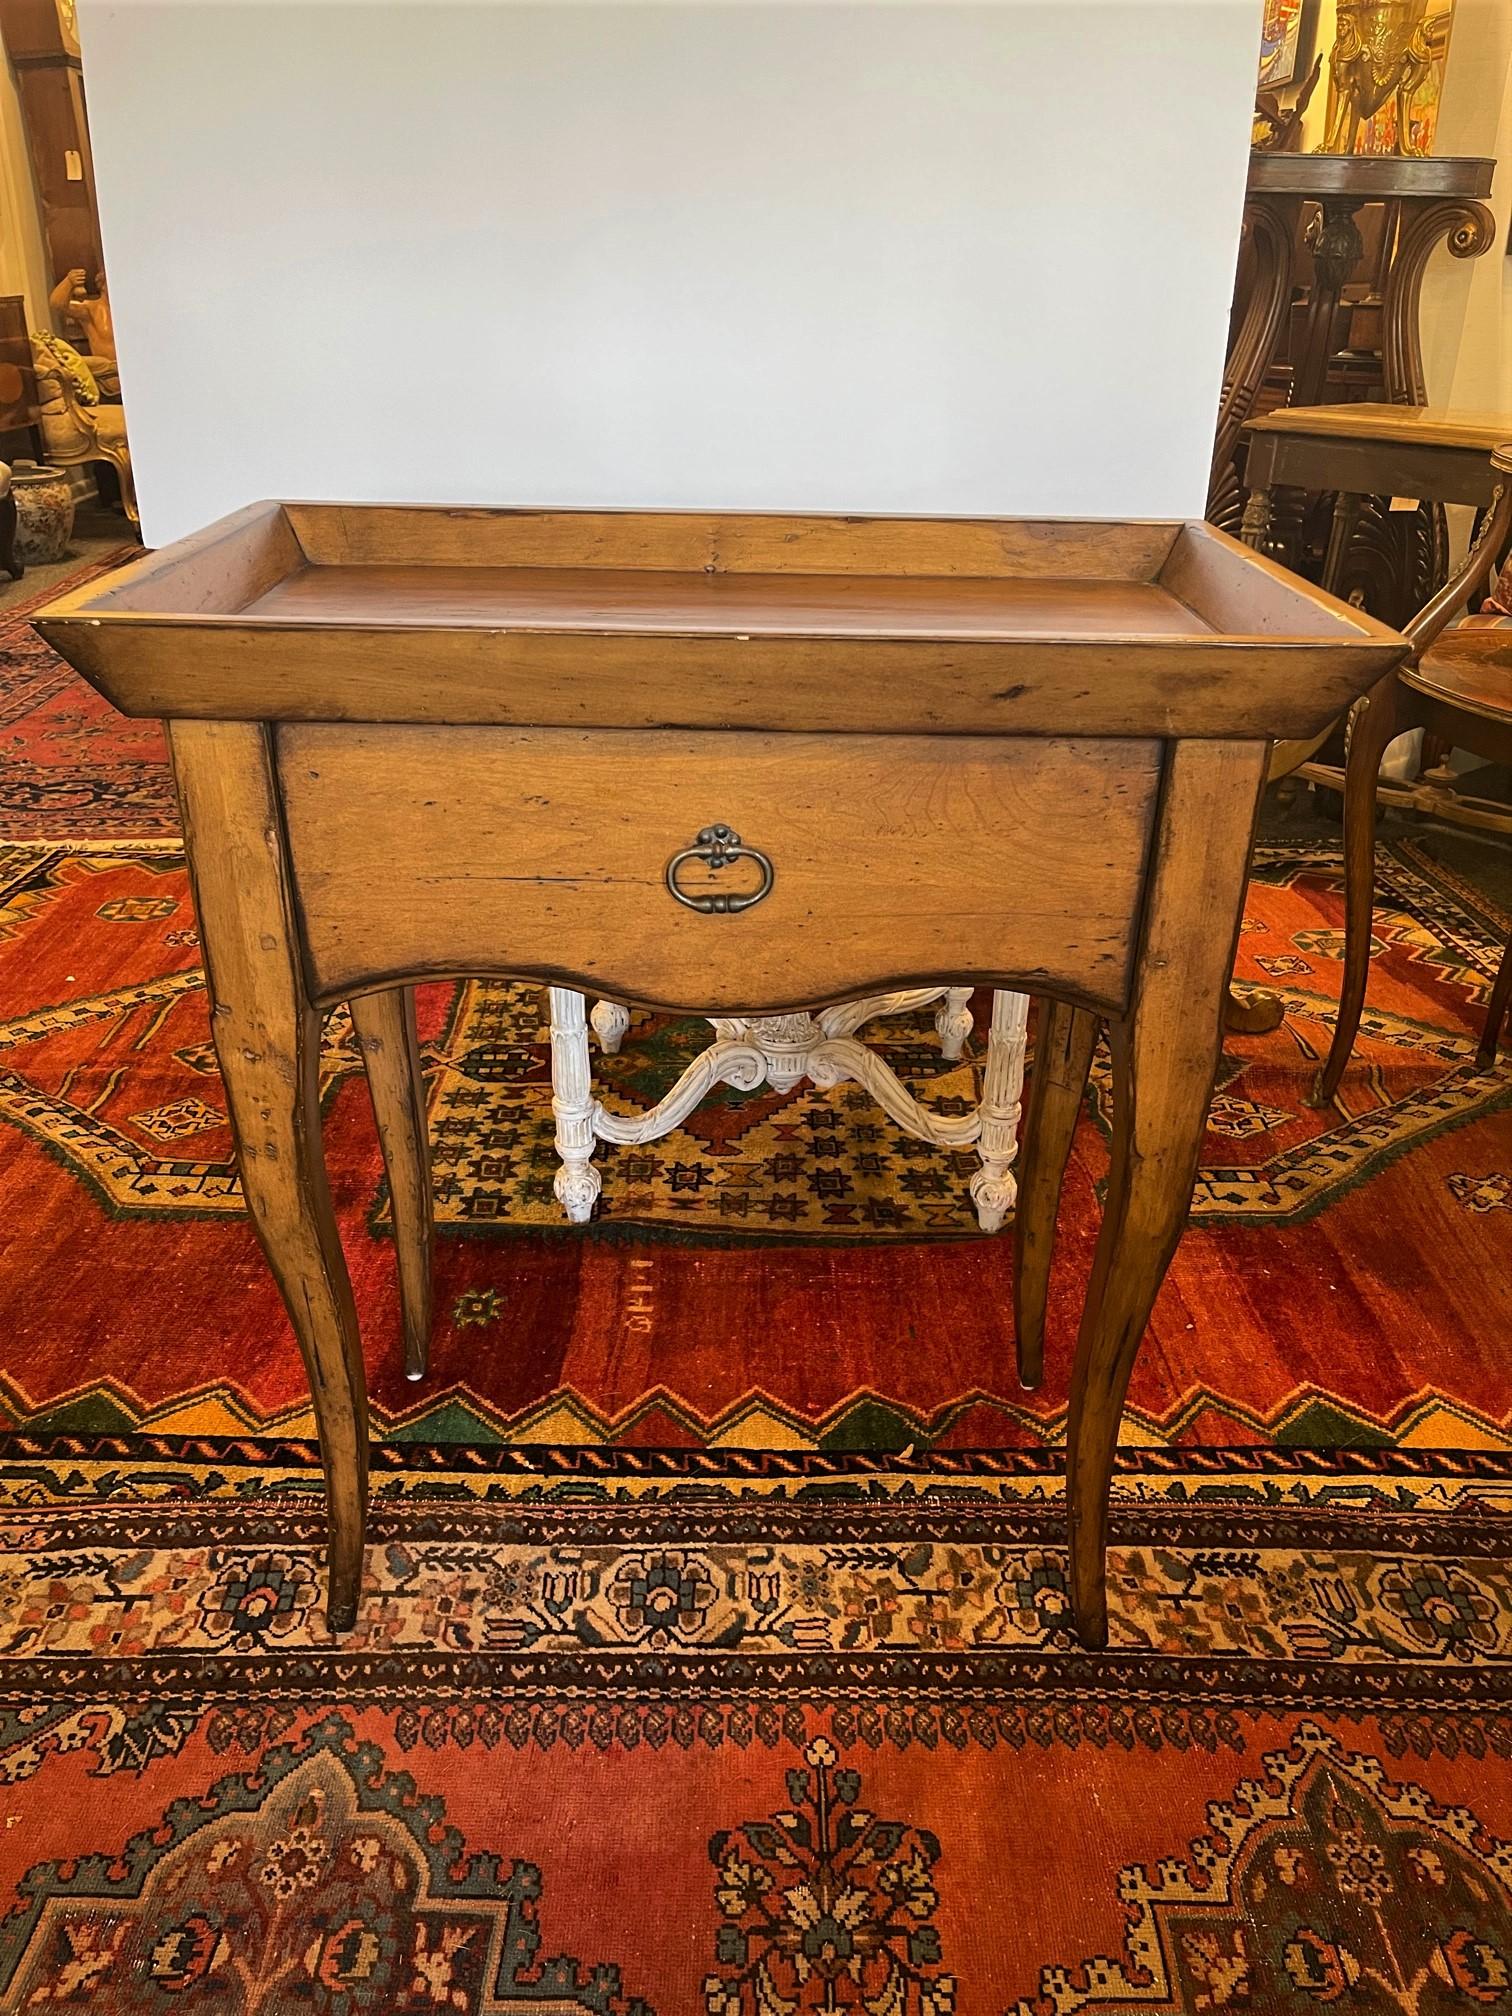 French Provincial tray top side table with a drawer, 19th century.